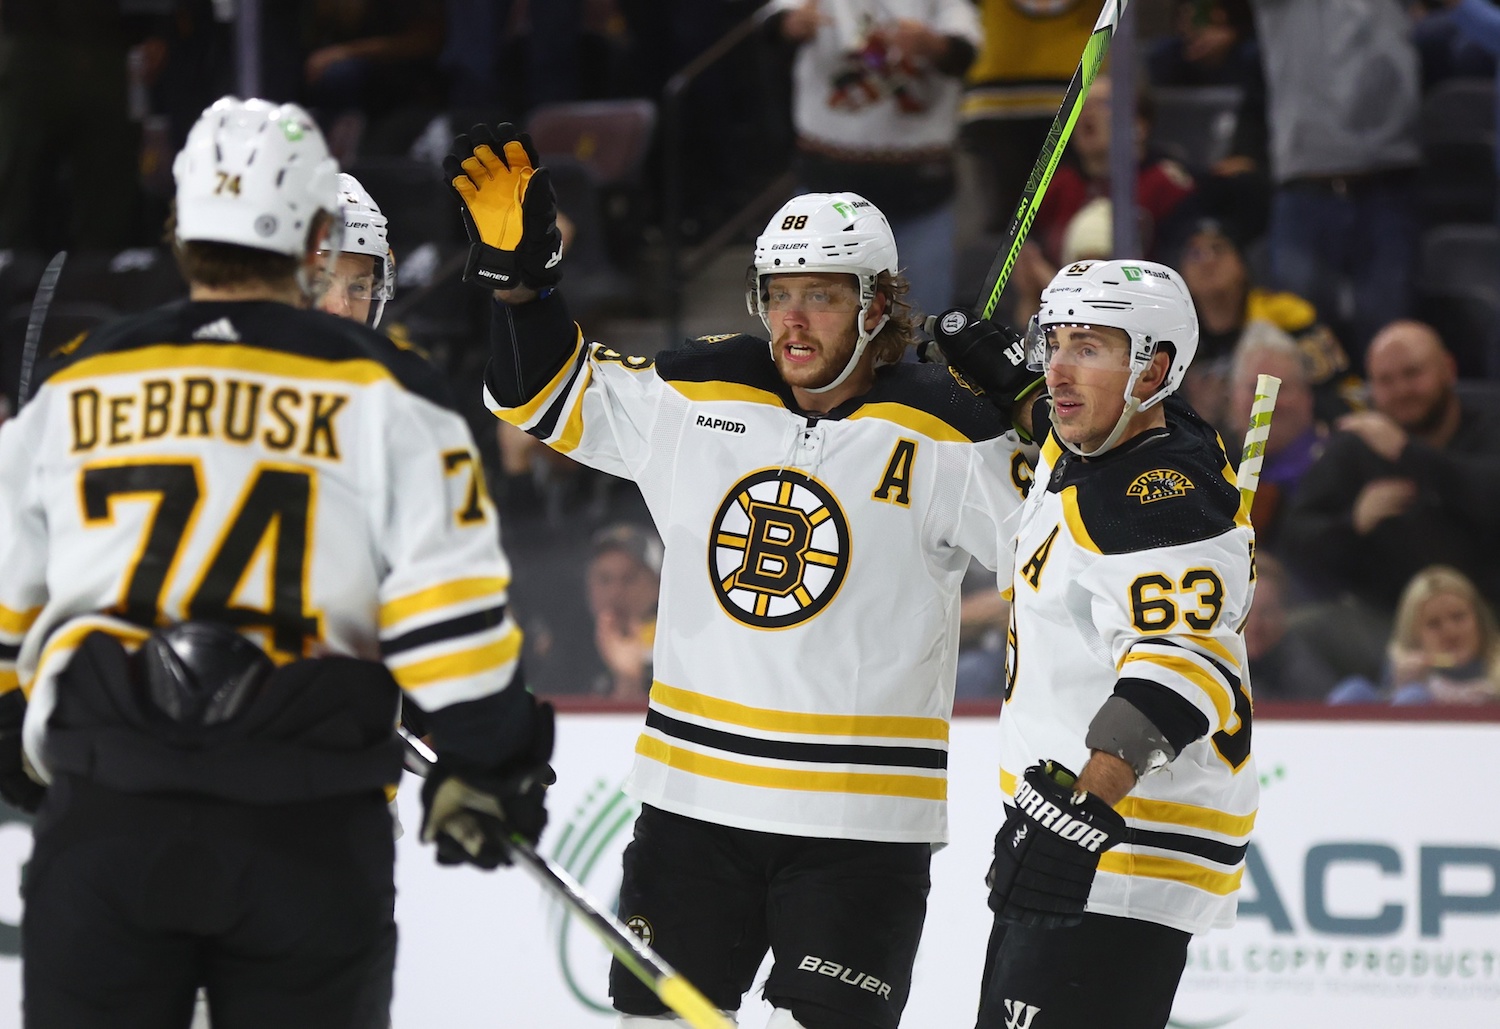 Dec 9, 2022; Tempe, Arizona, USA; Boston Bruins right wing David Pastrnak (88) celebrates a goal with left wing Brad Marchand (63) against the Arizona Coyotes in the first period at Mullett Arena. Mandatory Credit: Mark J. Rebilas/USA TODAY Sports